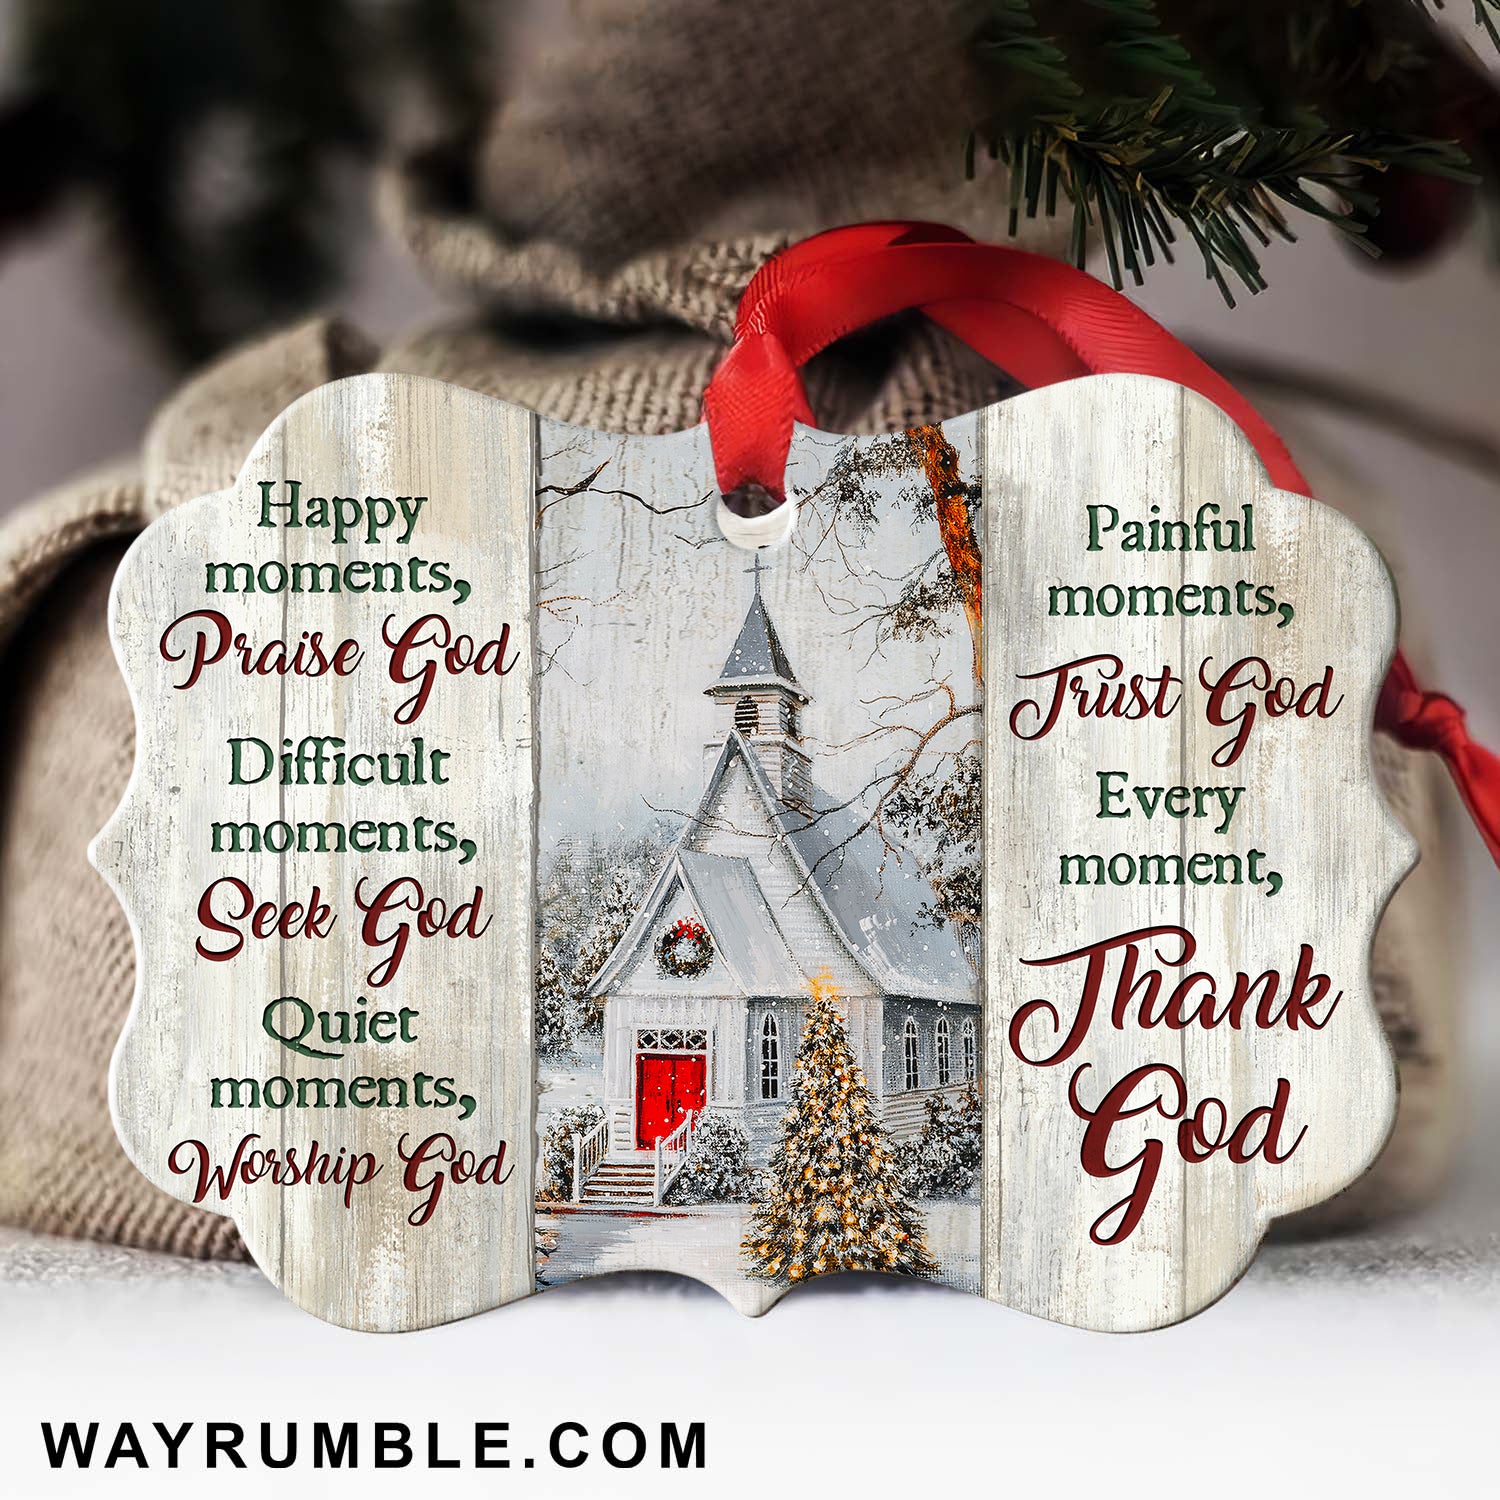 Jesus - Small Church in Winter - Christmas - Every moment, thank God - Aluminum Ornament